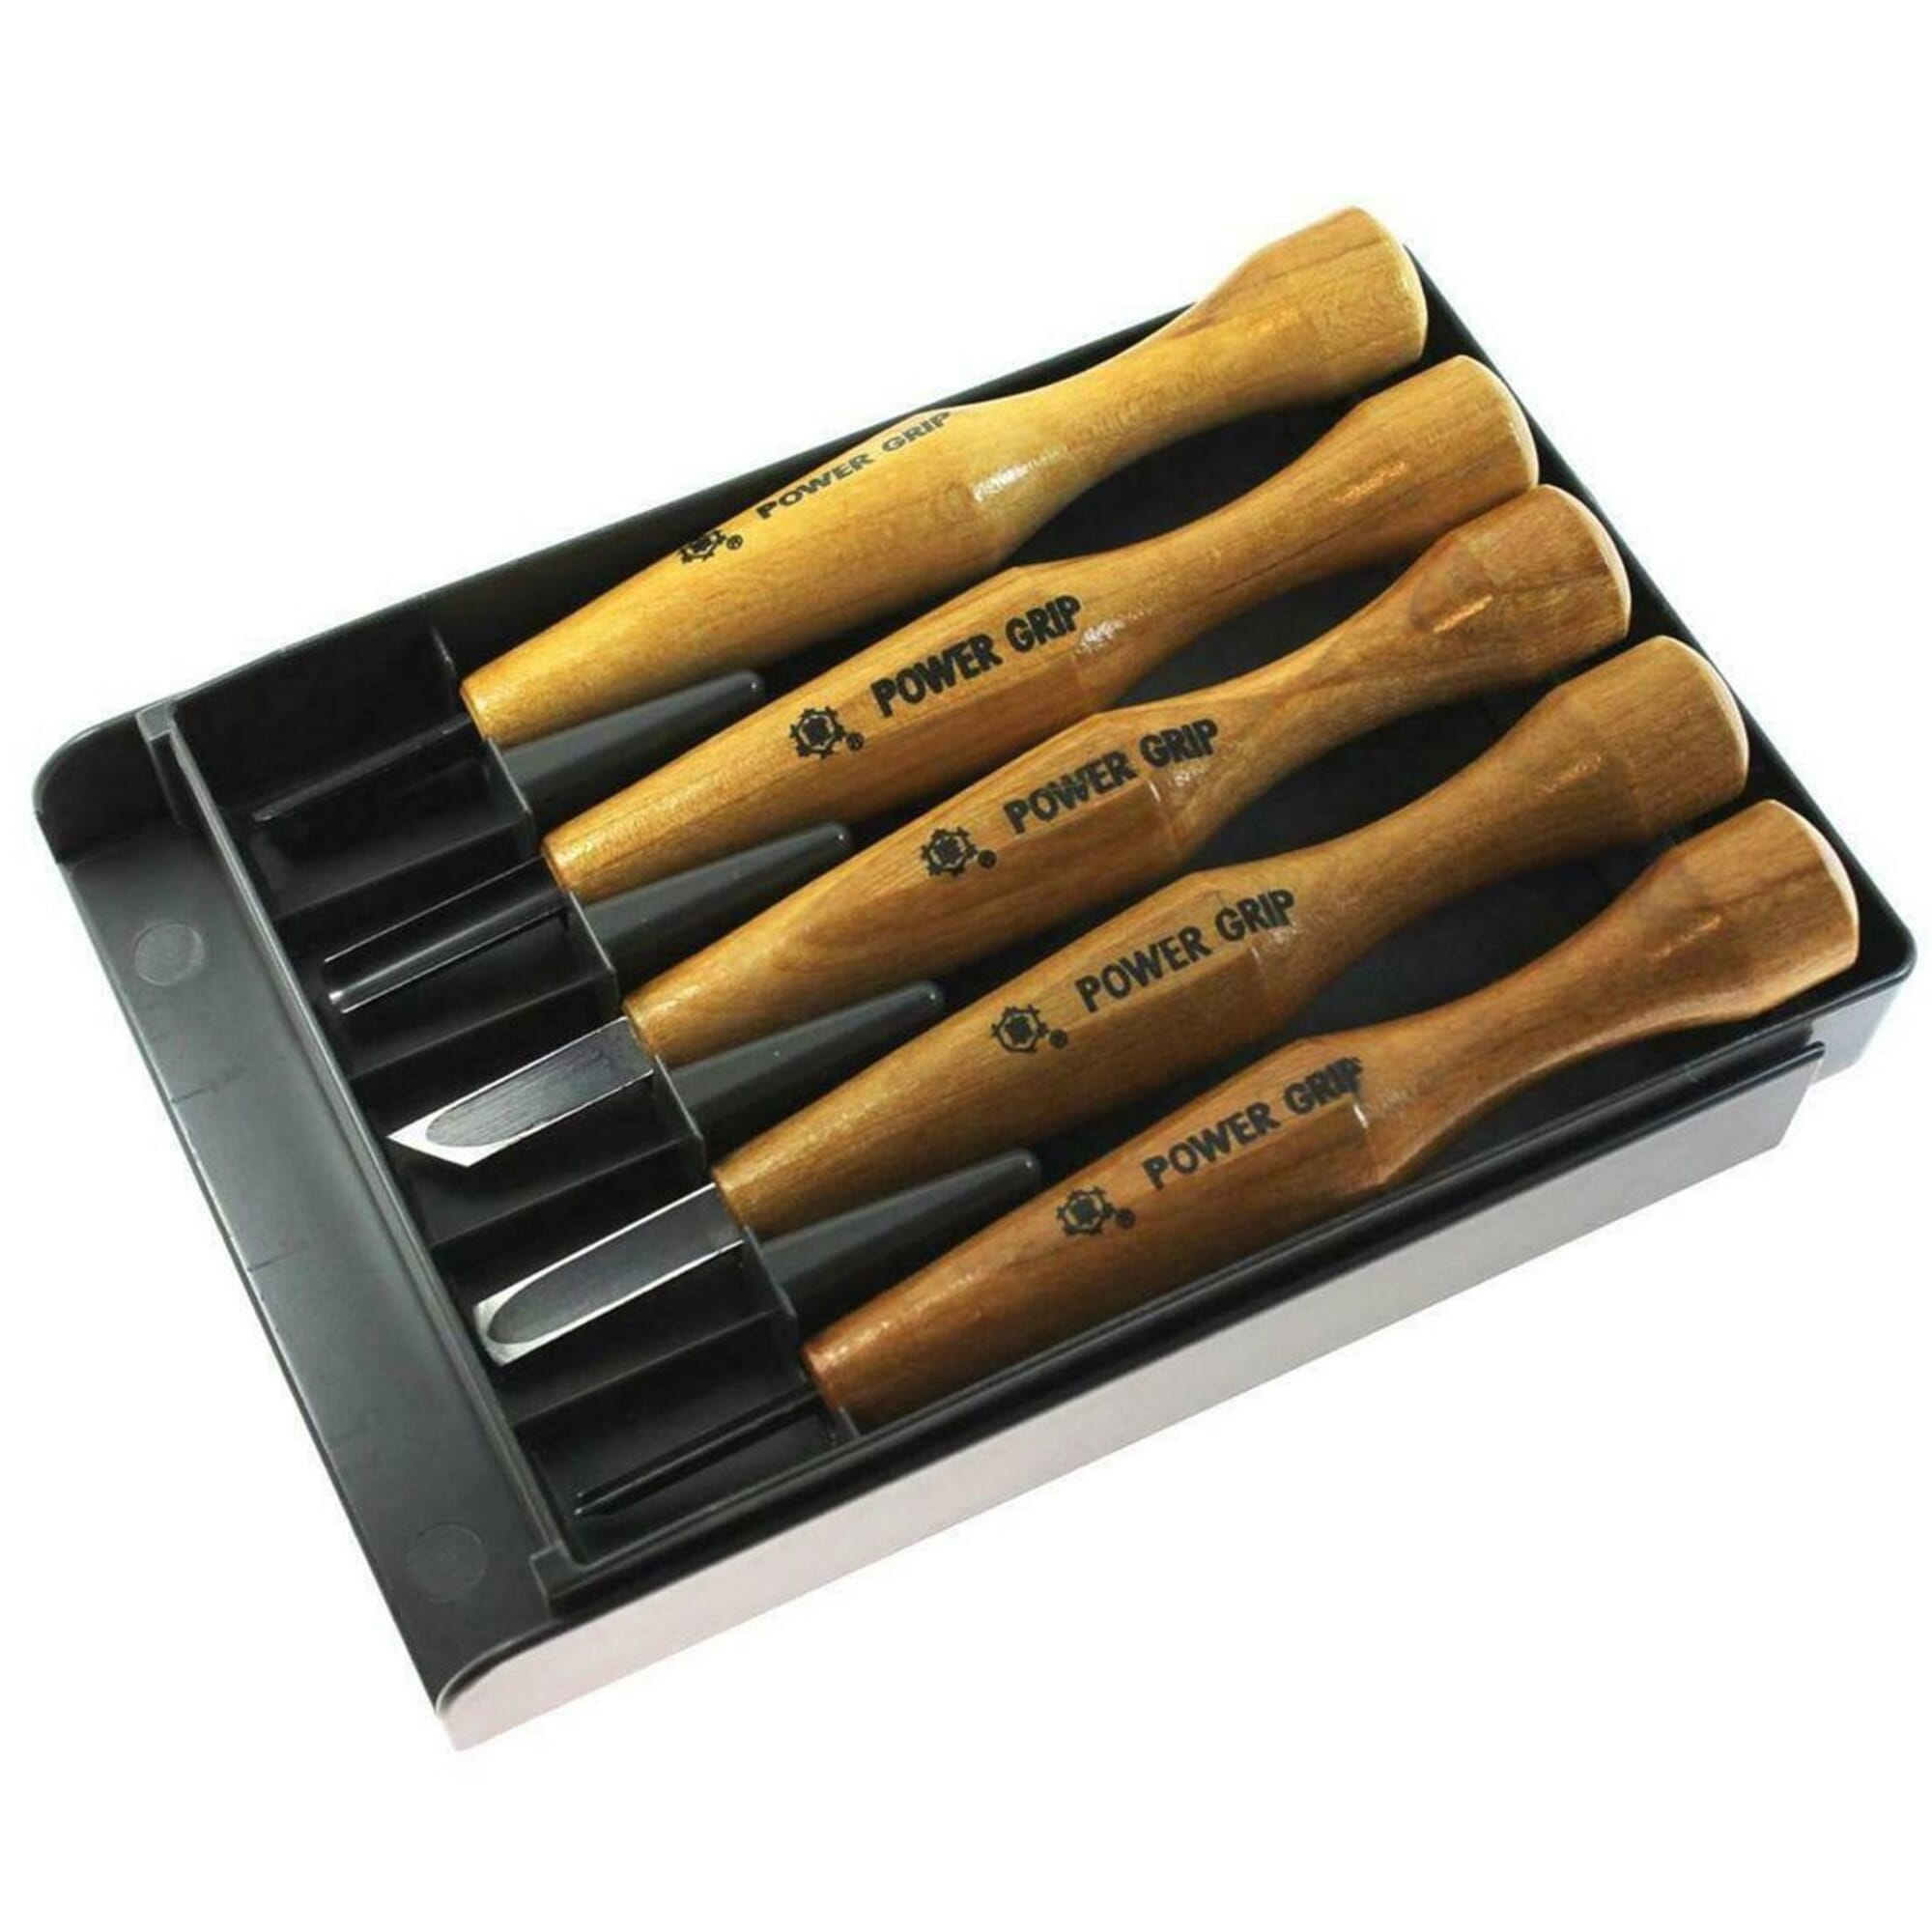 Mikisyo Japanese Power Grip Wood Carving Tool Kit set 7pcs From